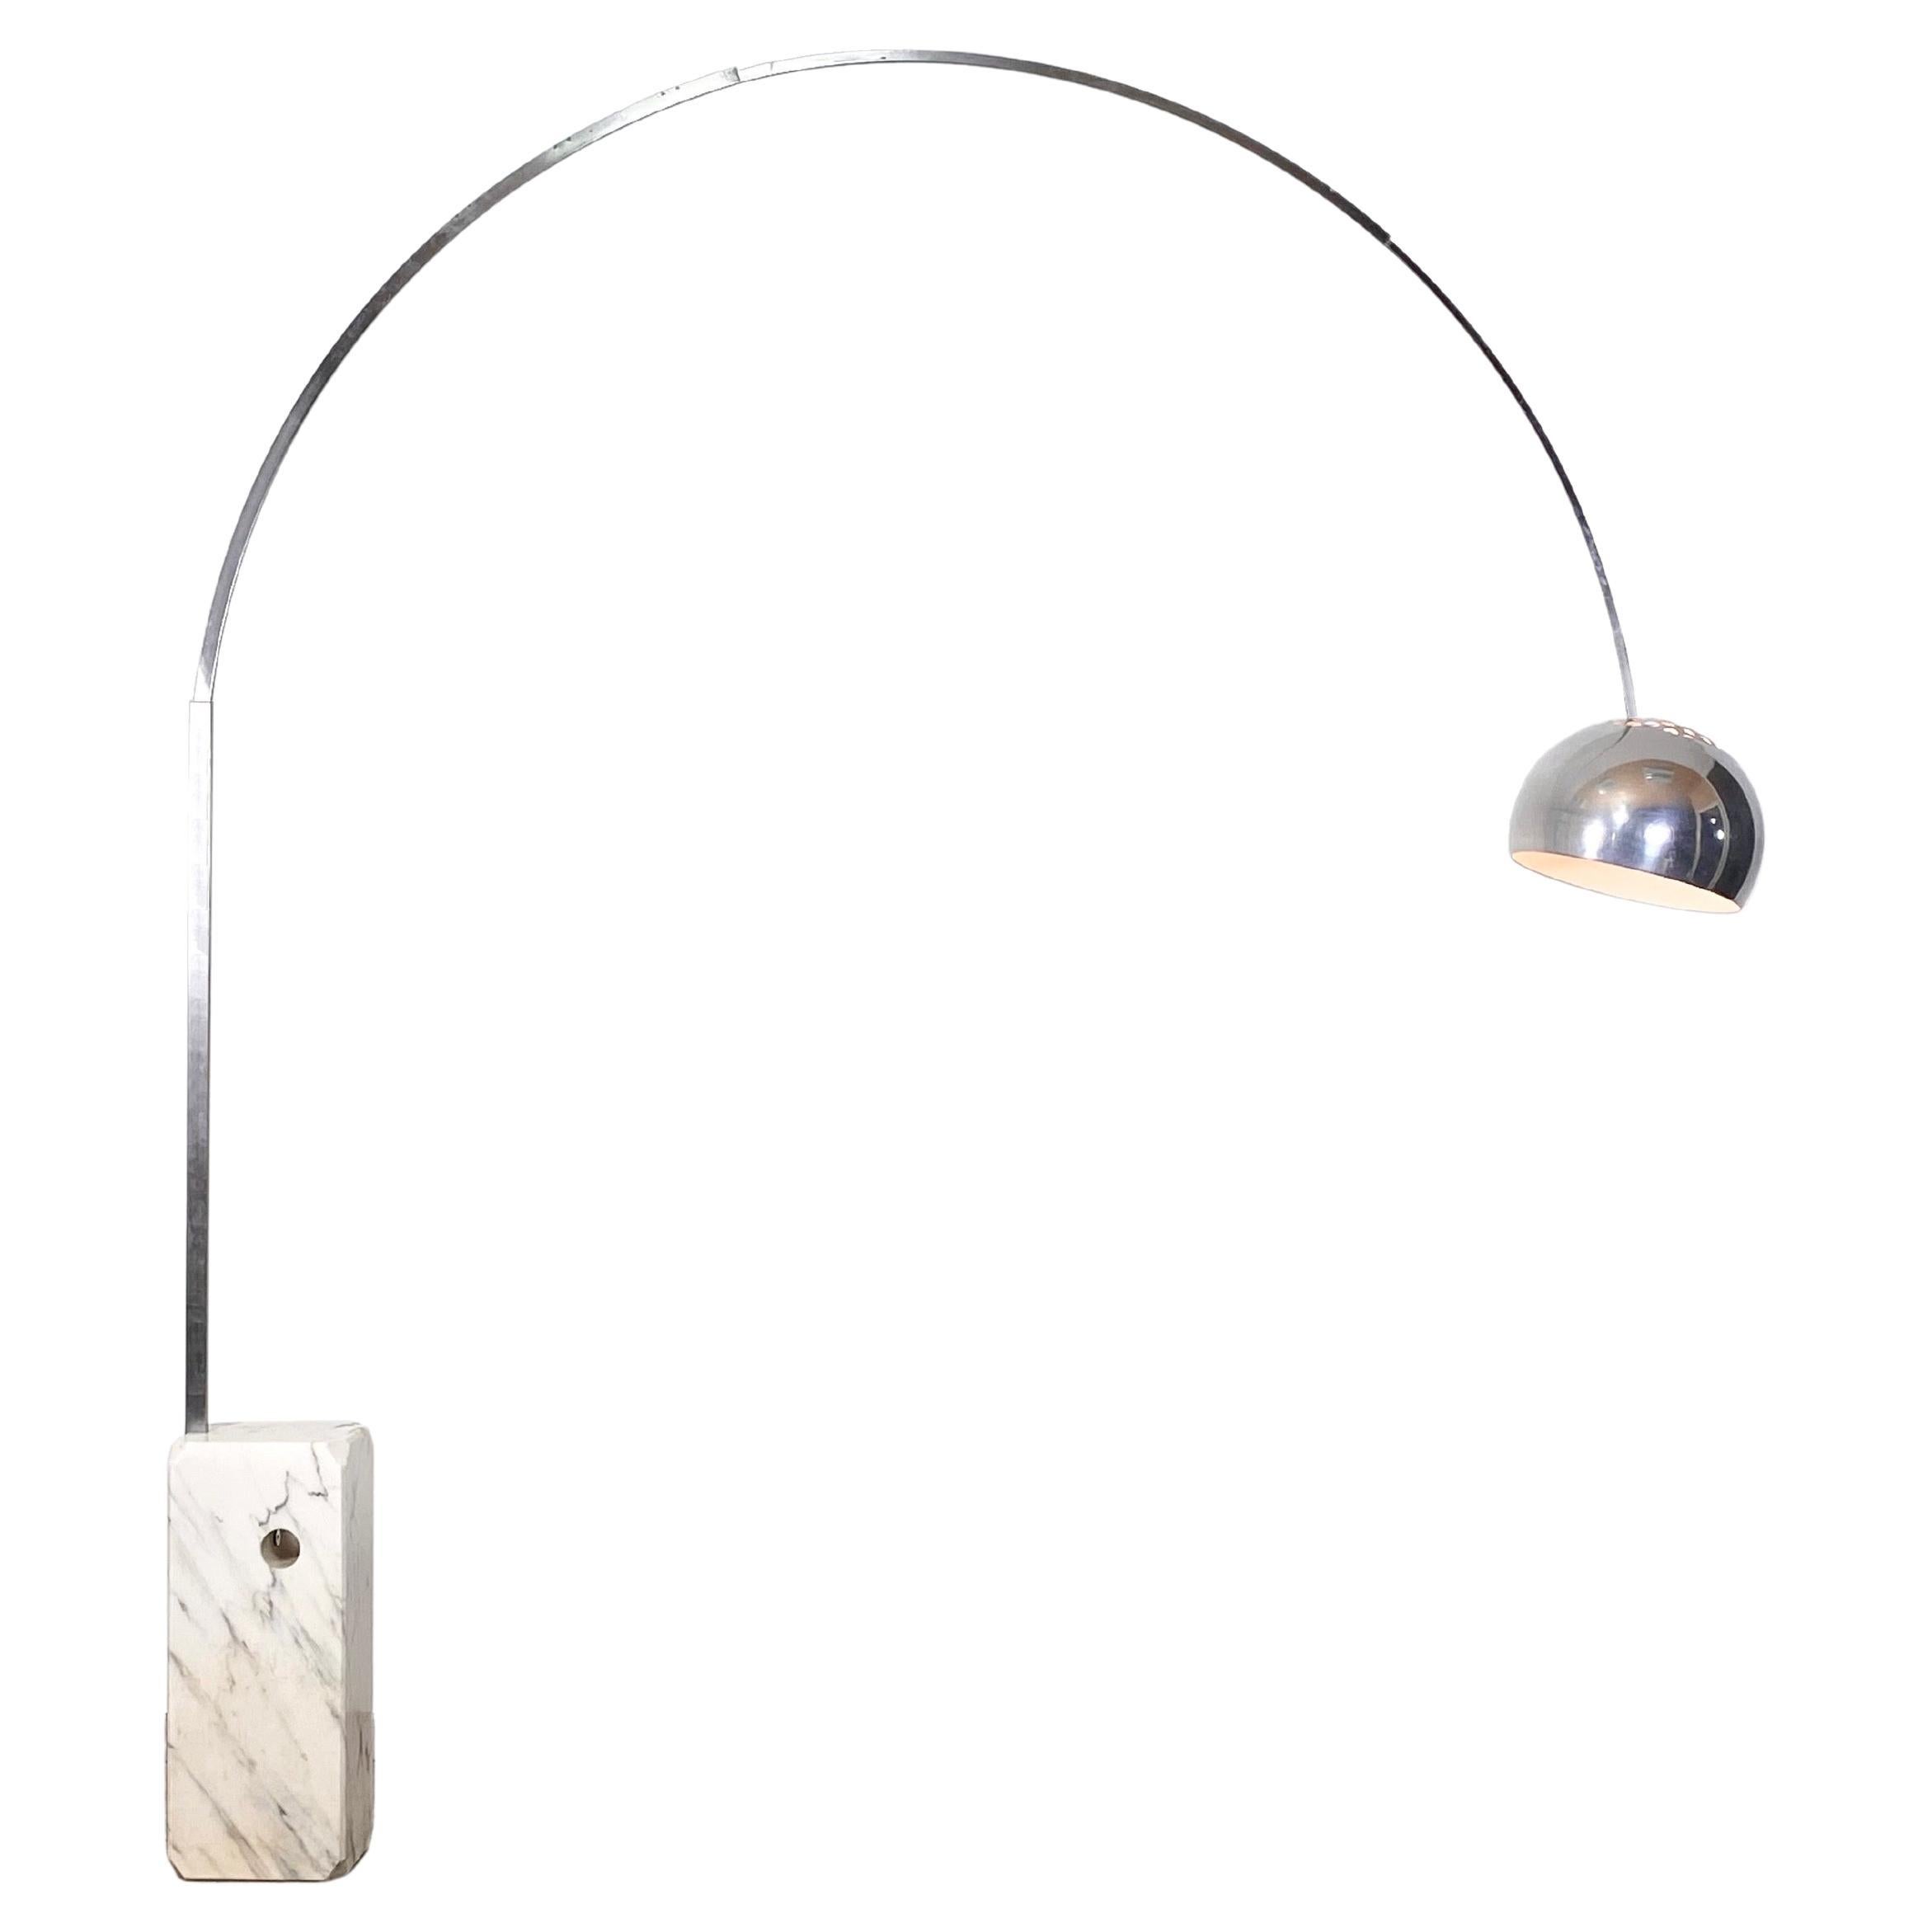 Early Arco lamp designed by Pier Giacomo & Achille Castiglioni for Flos, 1962